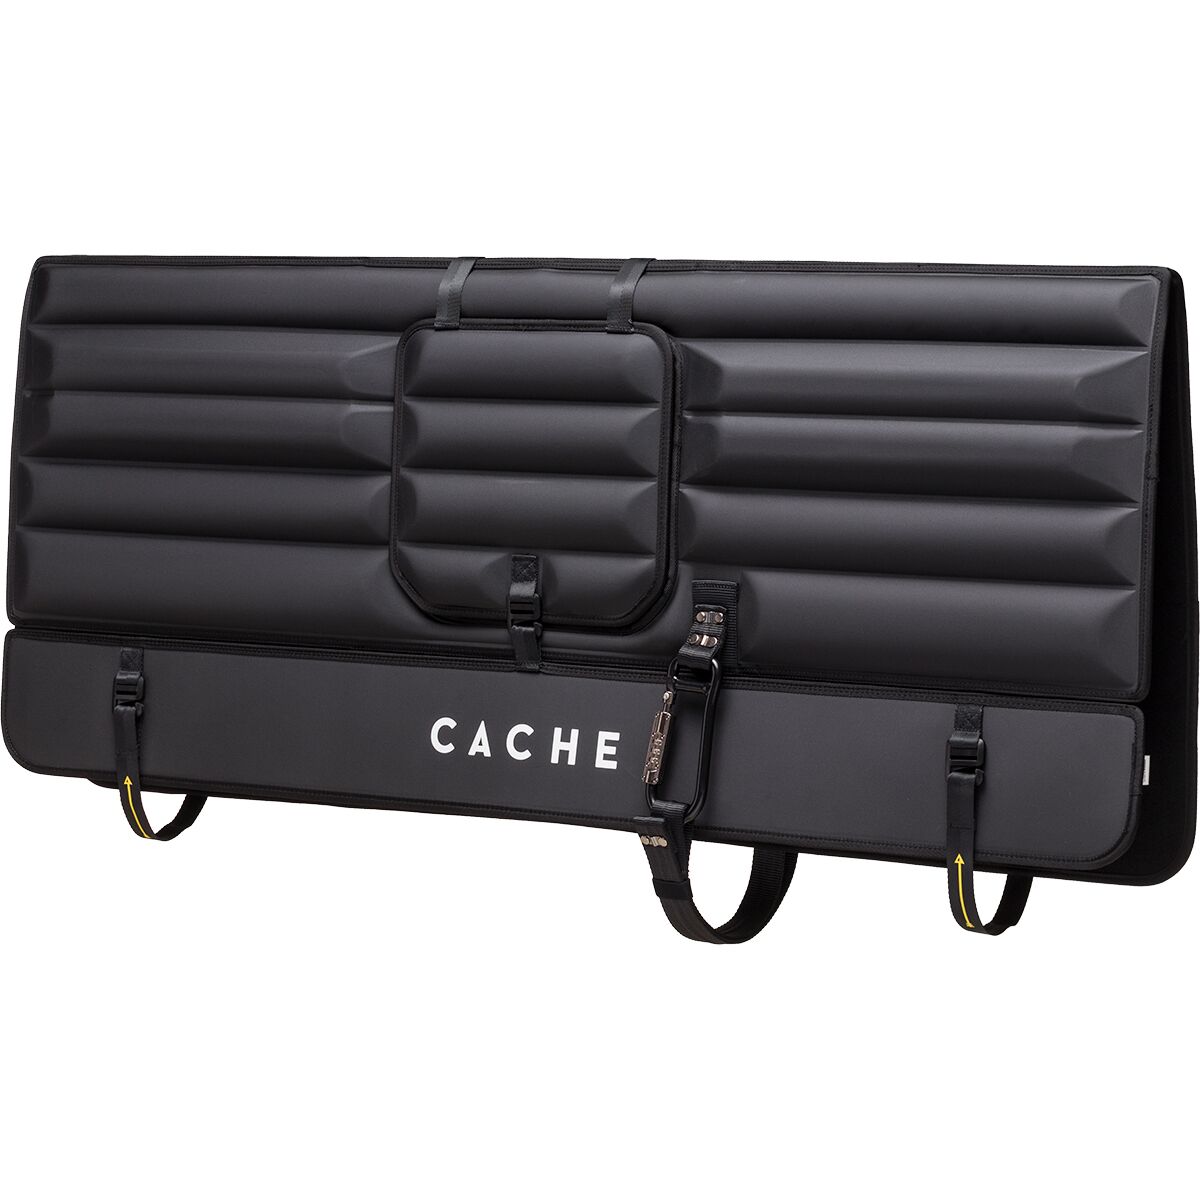 Cache The Basecamp Tailgate Pad